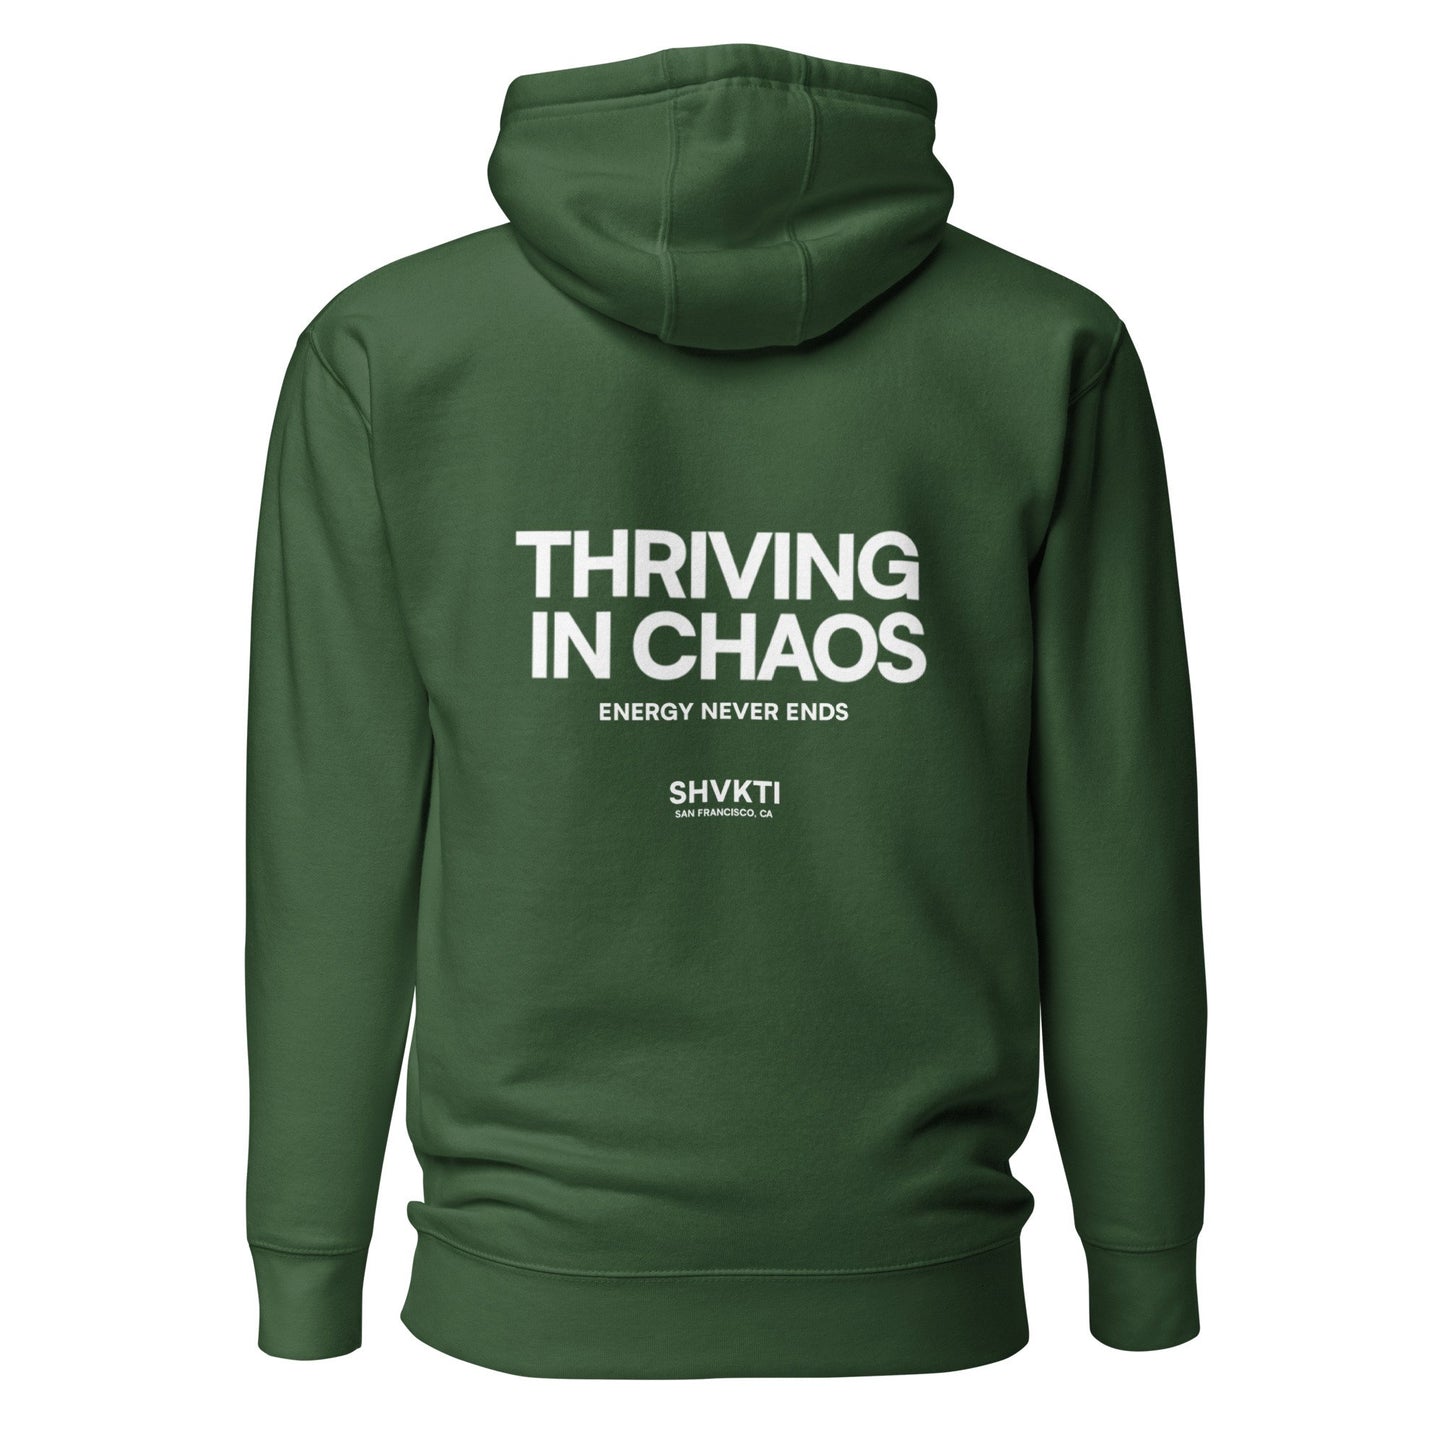 THRIVING IN CHAOS (VOL. 4) (GREY)